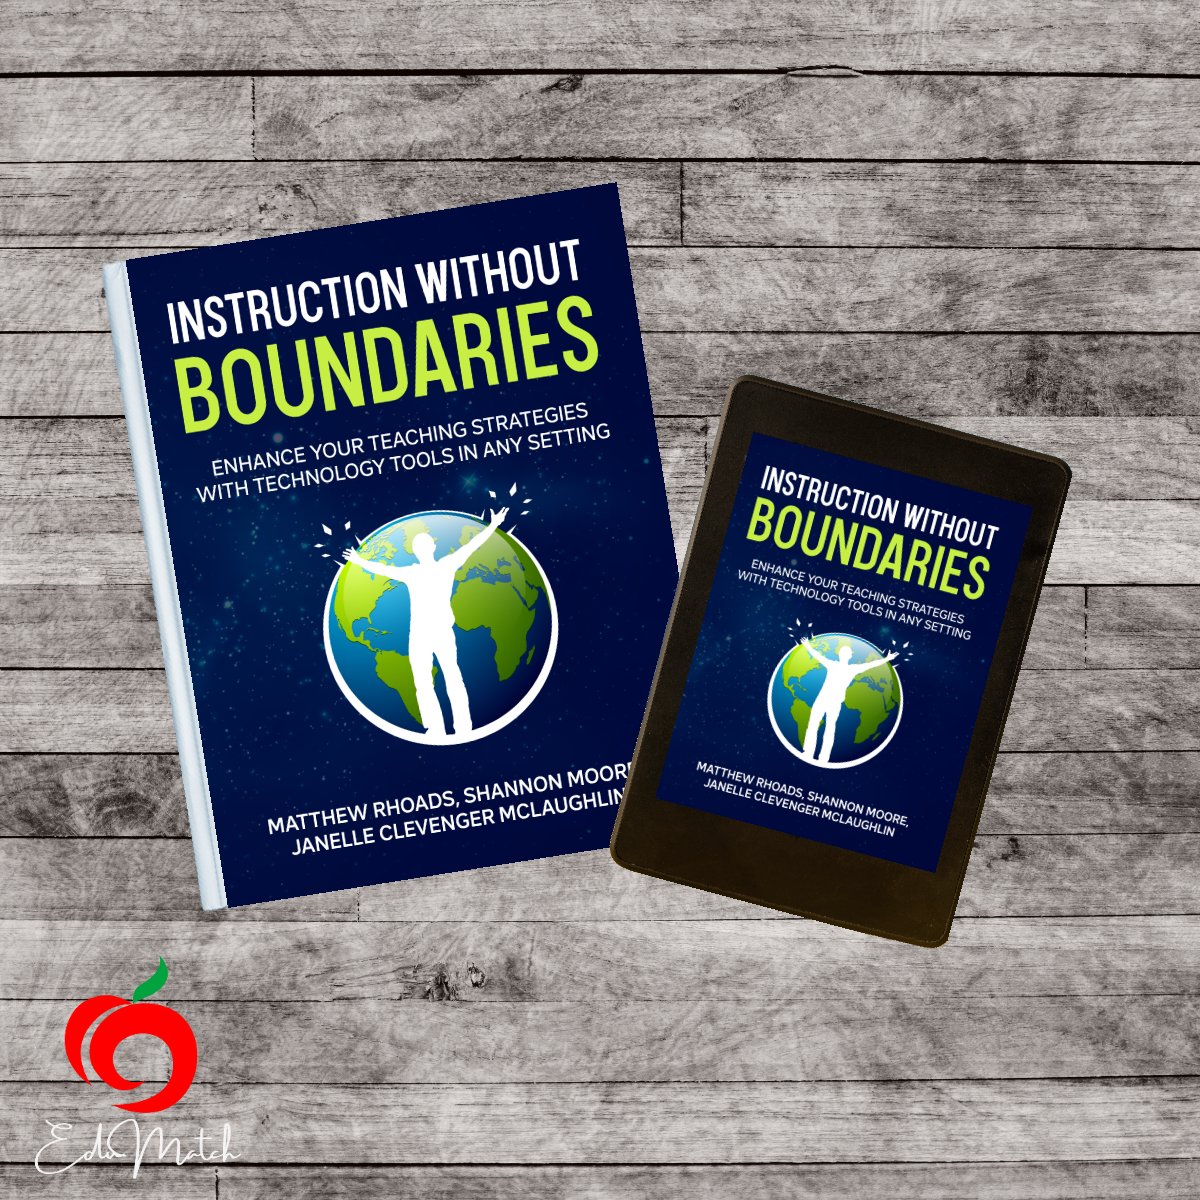 Grateful to all the wonderful humans at @EdumatchBooks for all their hard work and dedication to elevating #educatorvoices!

T-3 days until the release of #instructwithoutboundaries!

Find out more 🔽
🔗instructwithoutboundaries.com

#edumatch #eduTwitter #educationbooks #instruction